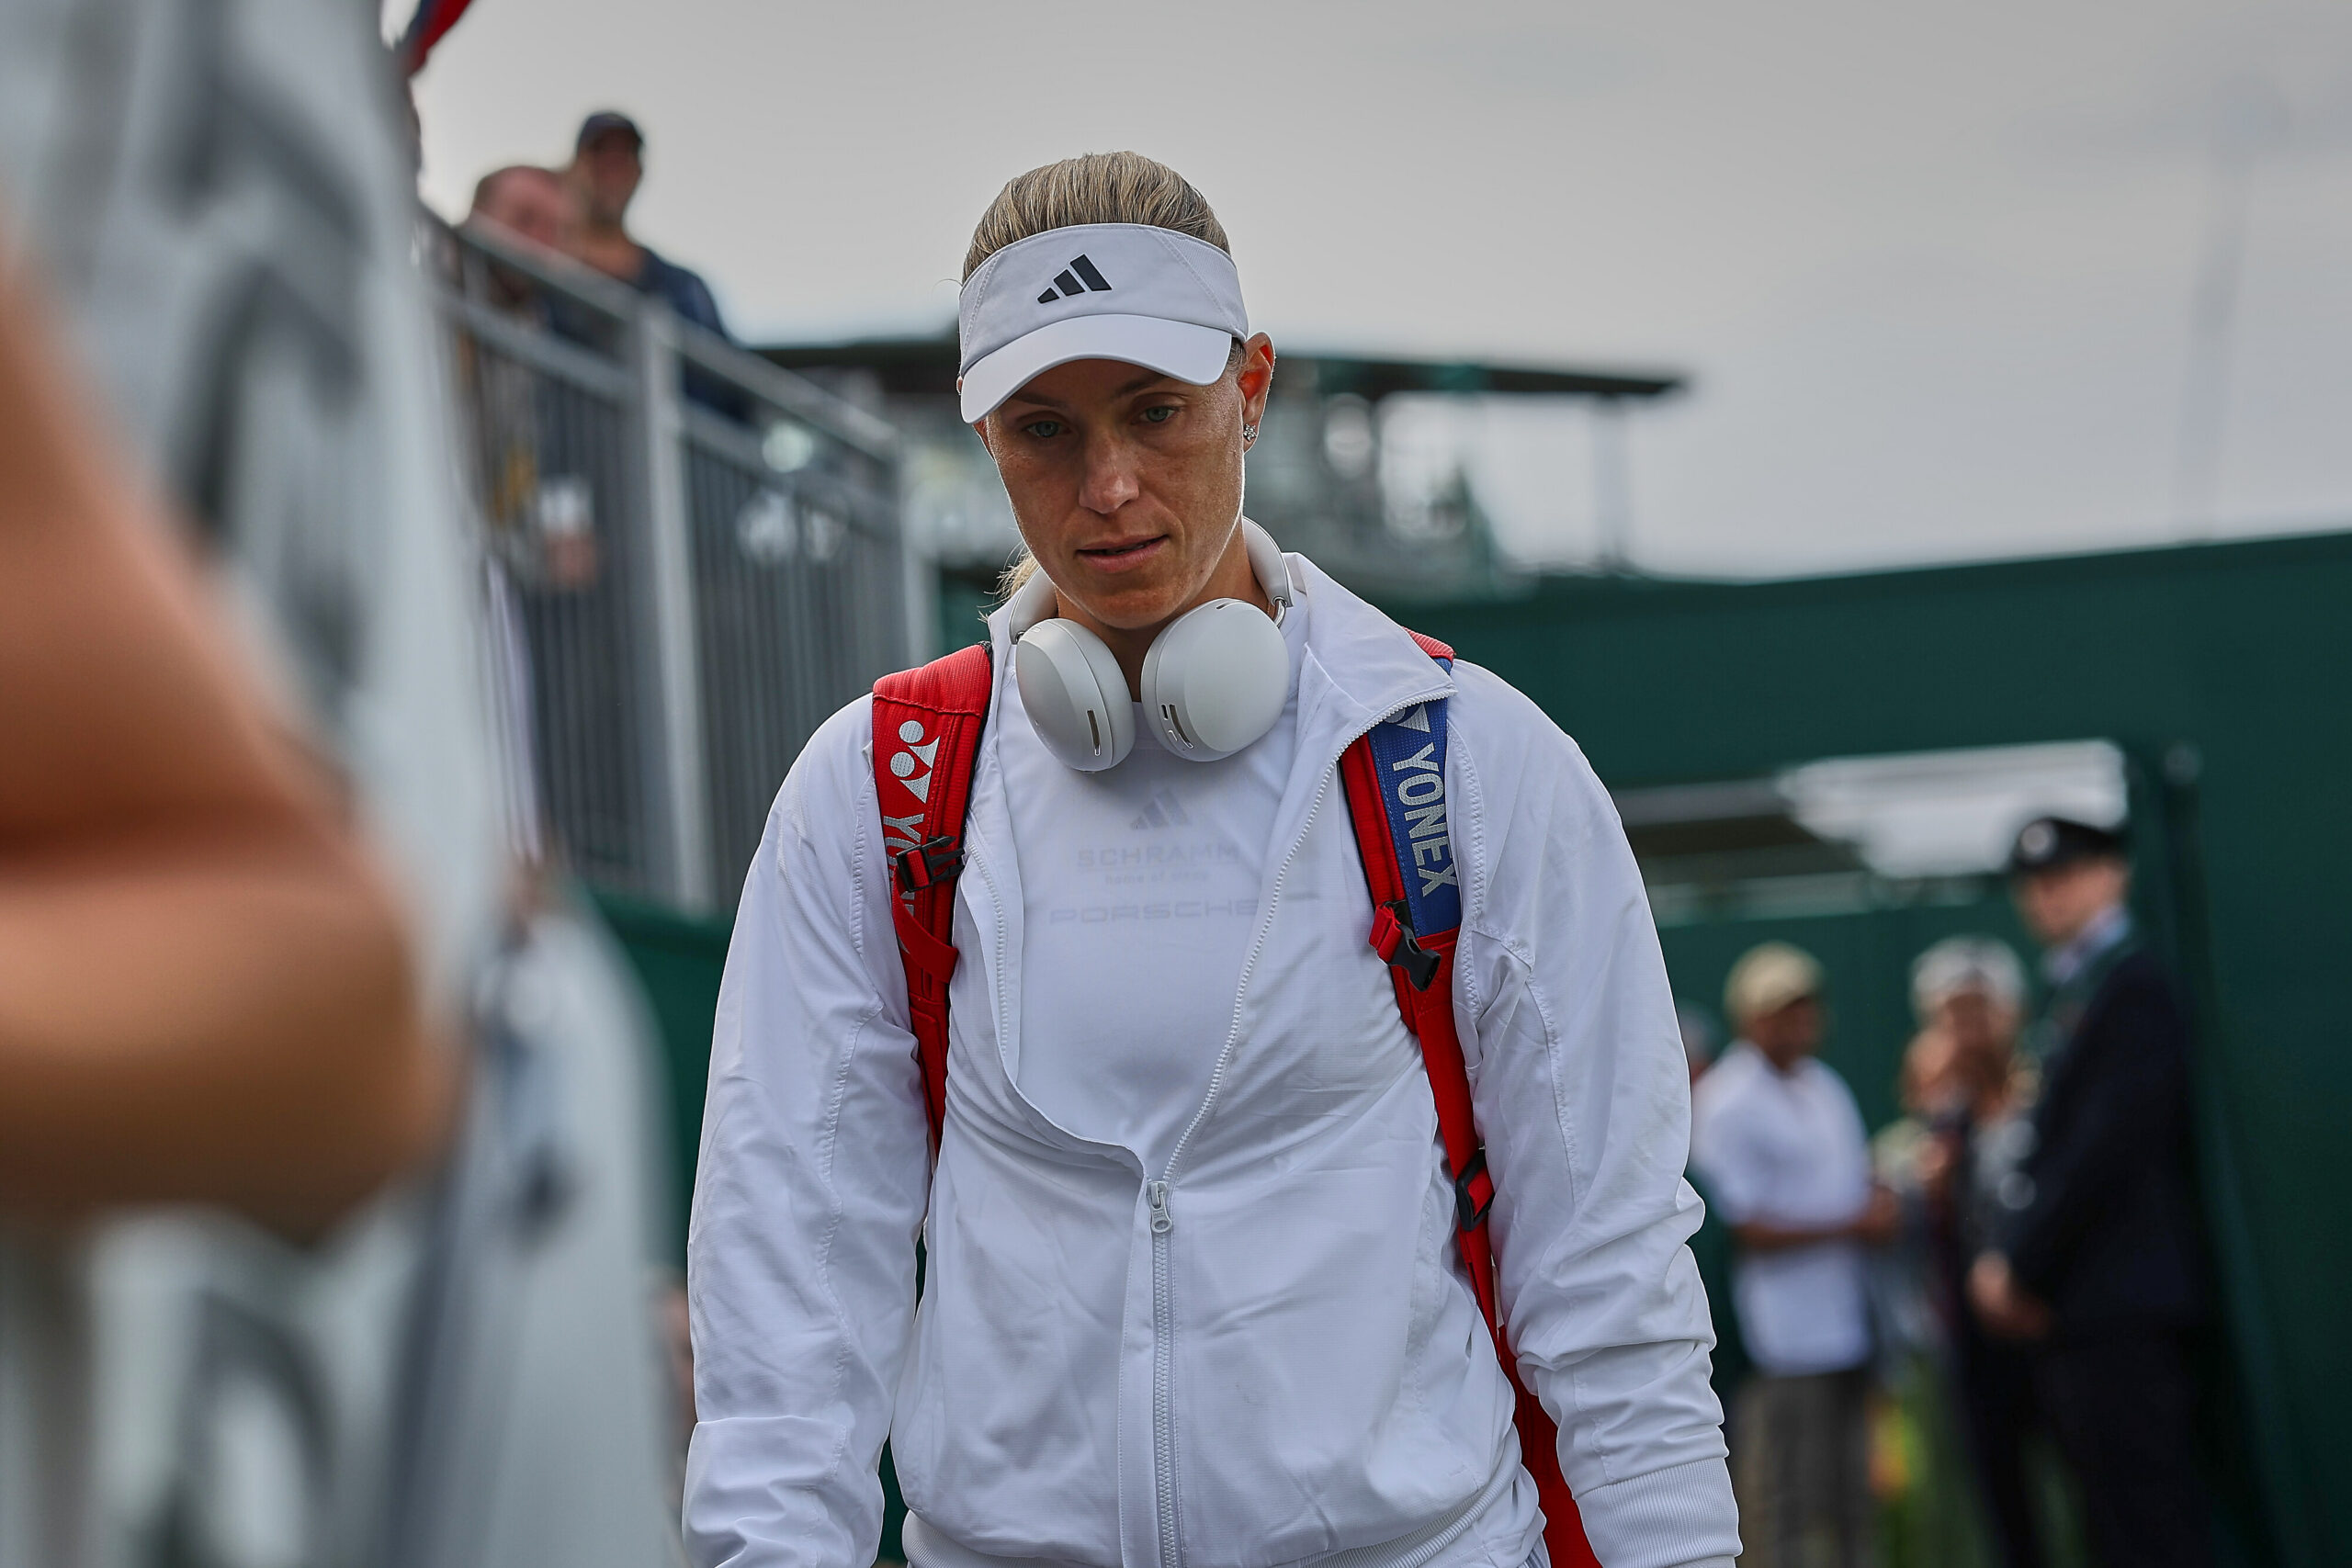 Angie Kerber guckt traurig